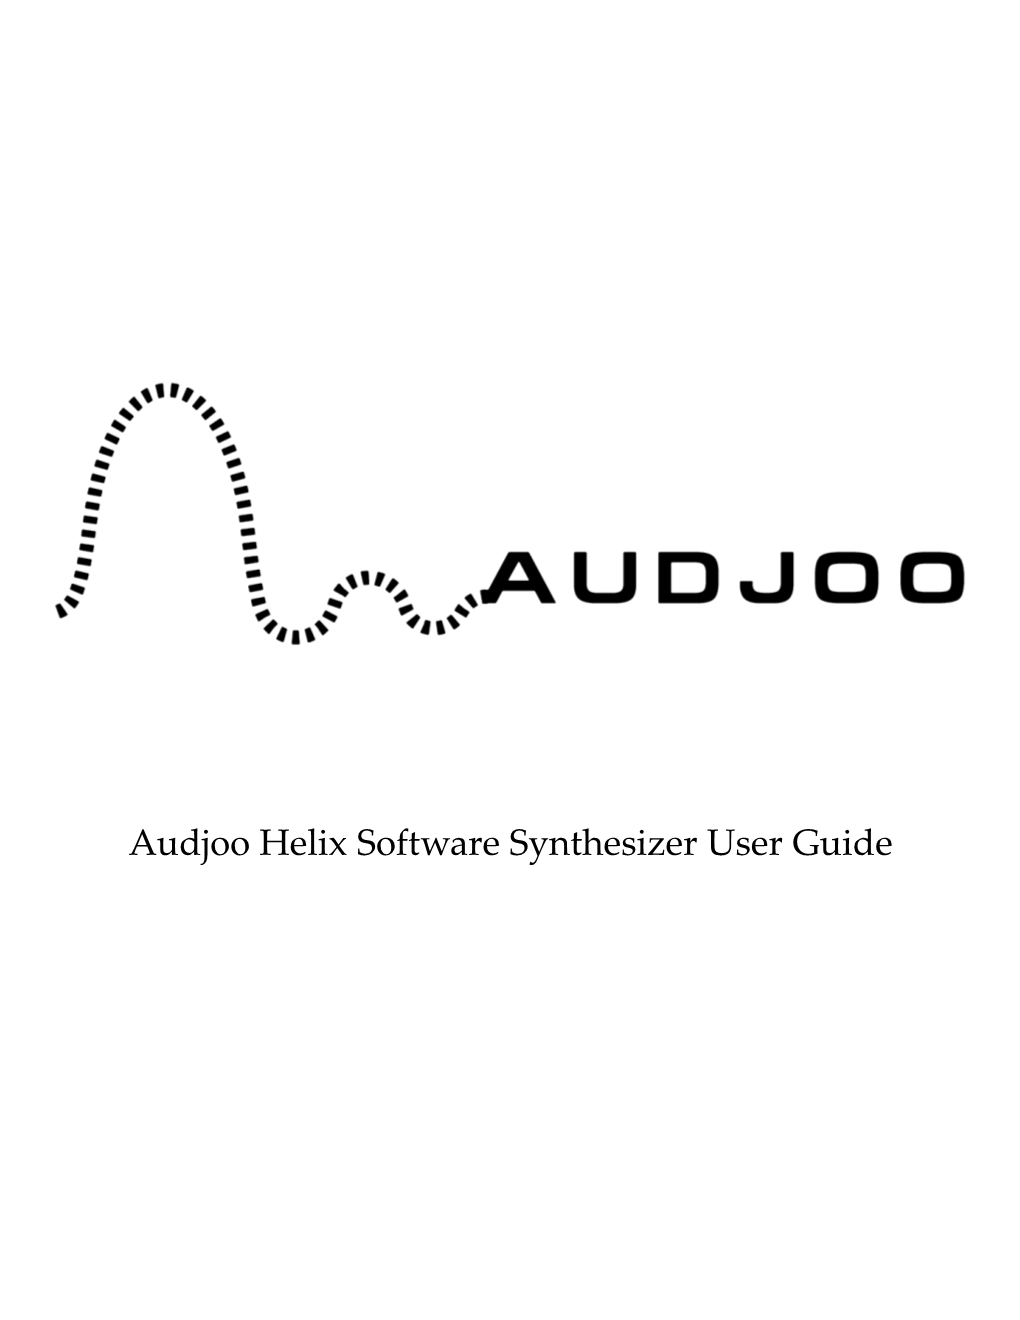 Audjoo Helix Software Synthesizer User Guide